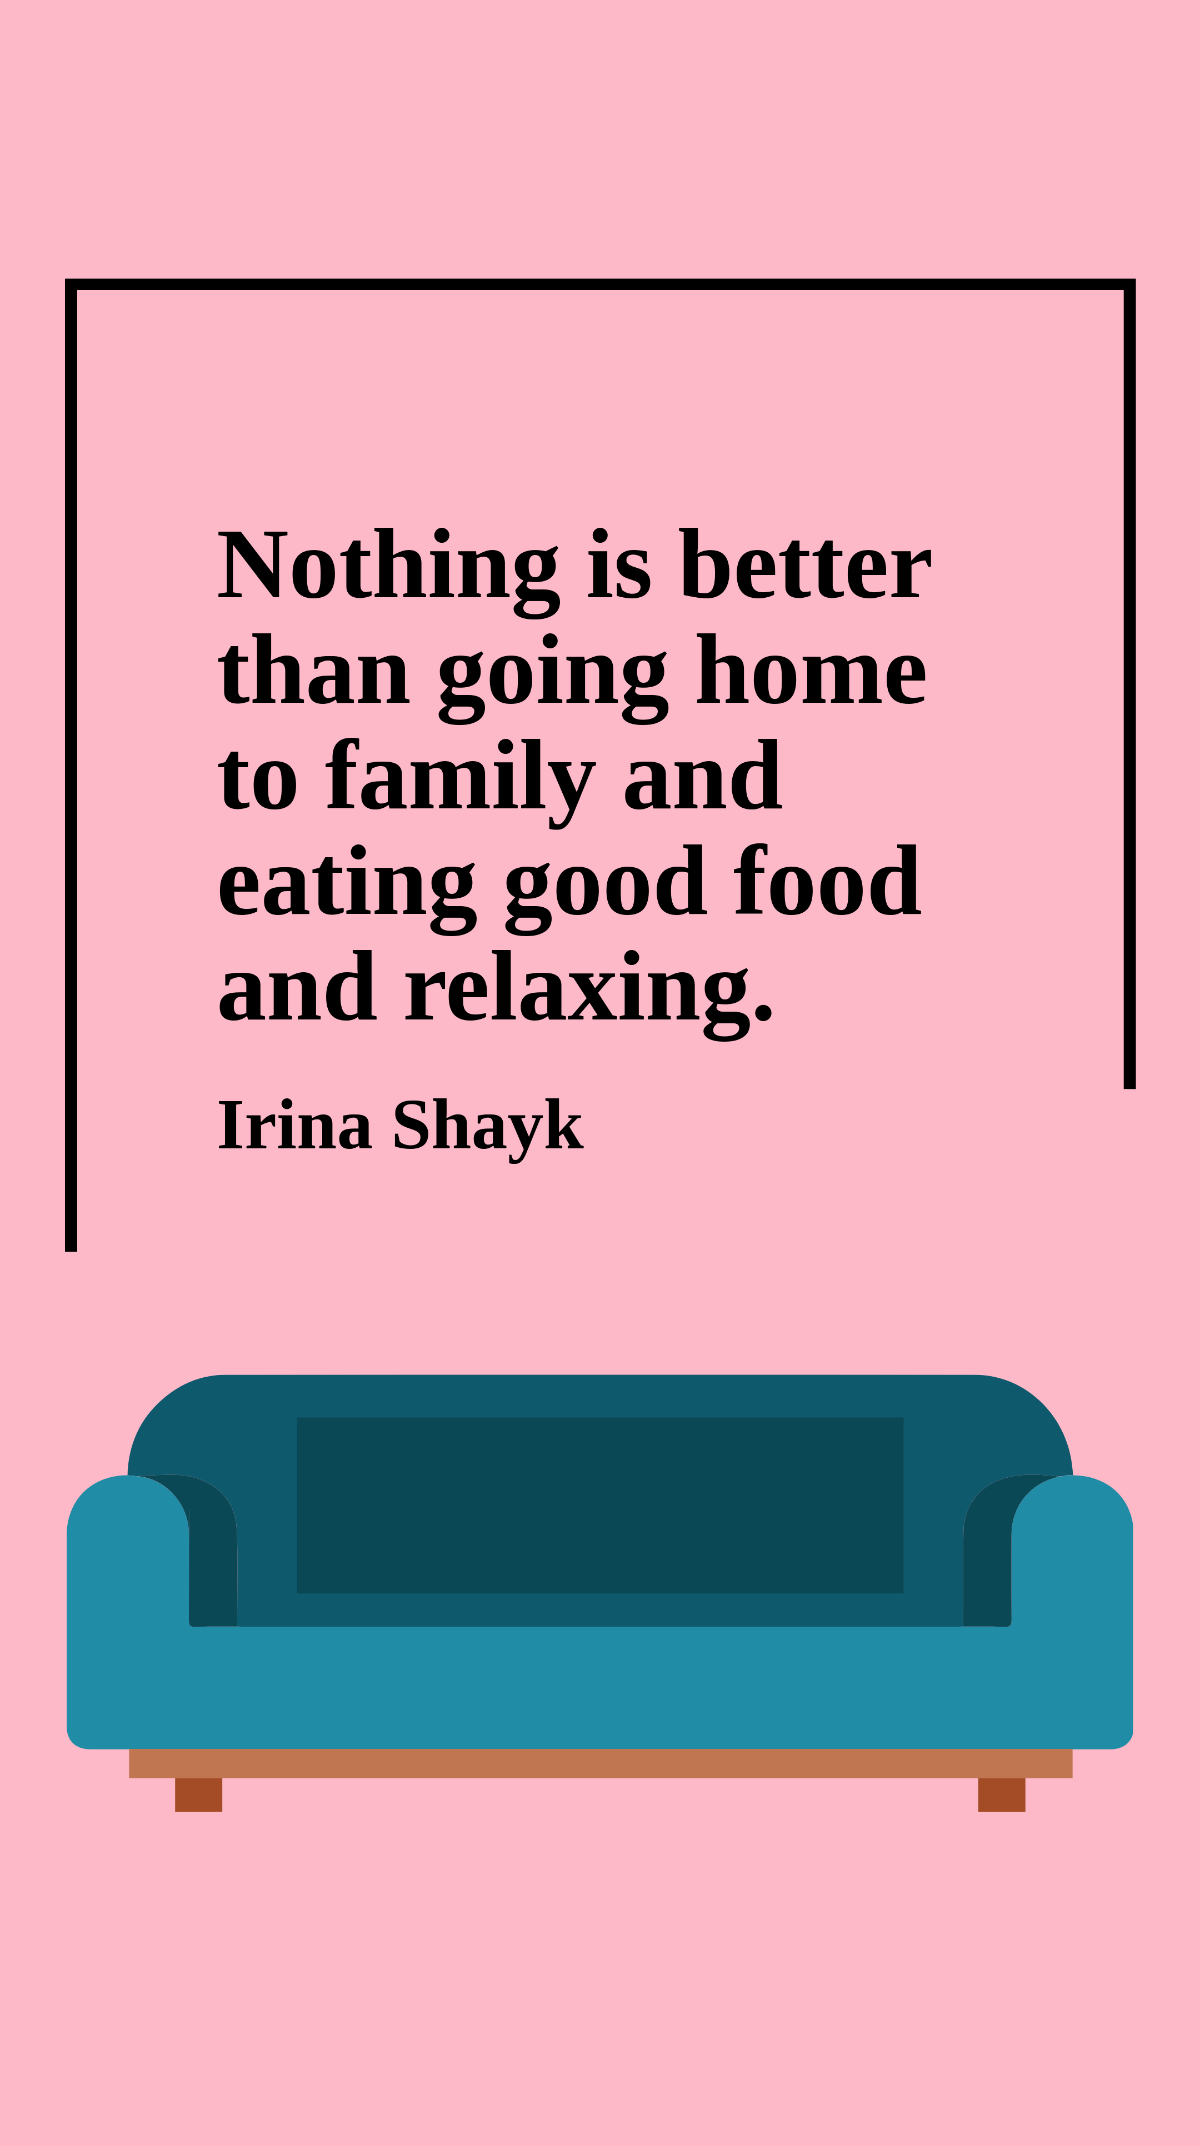 Free Irina Shayk - Nothing is better than going home to family and eating good food and relaxing. Template